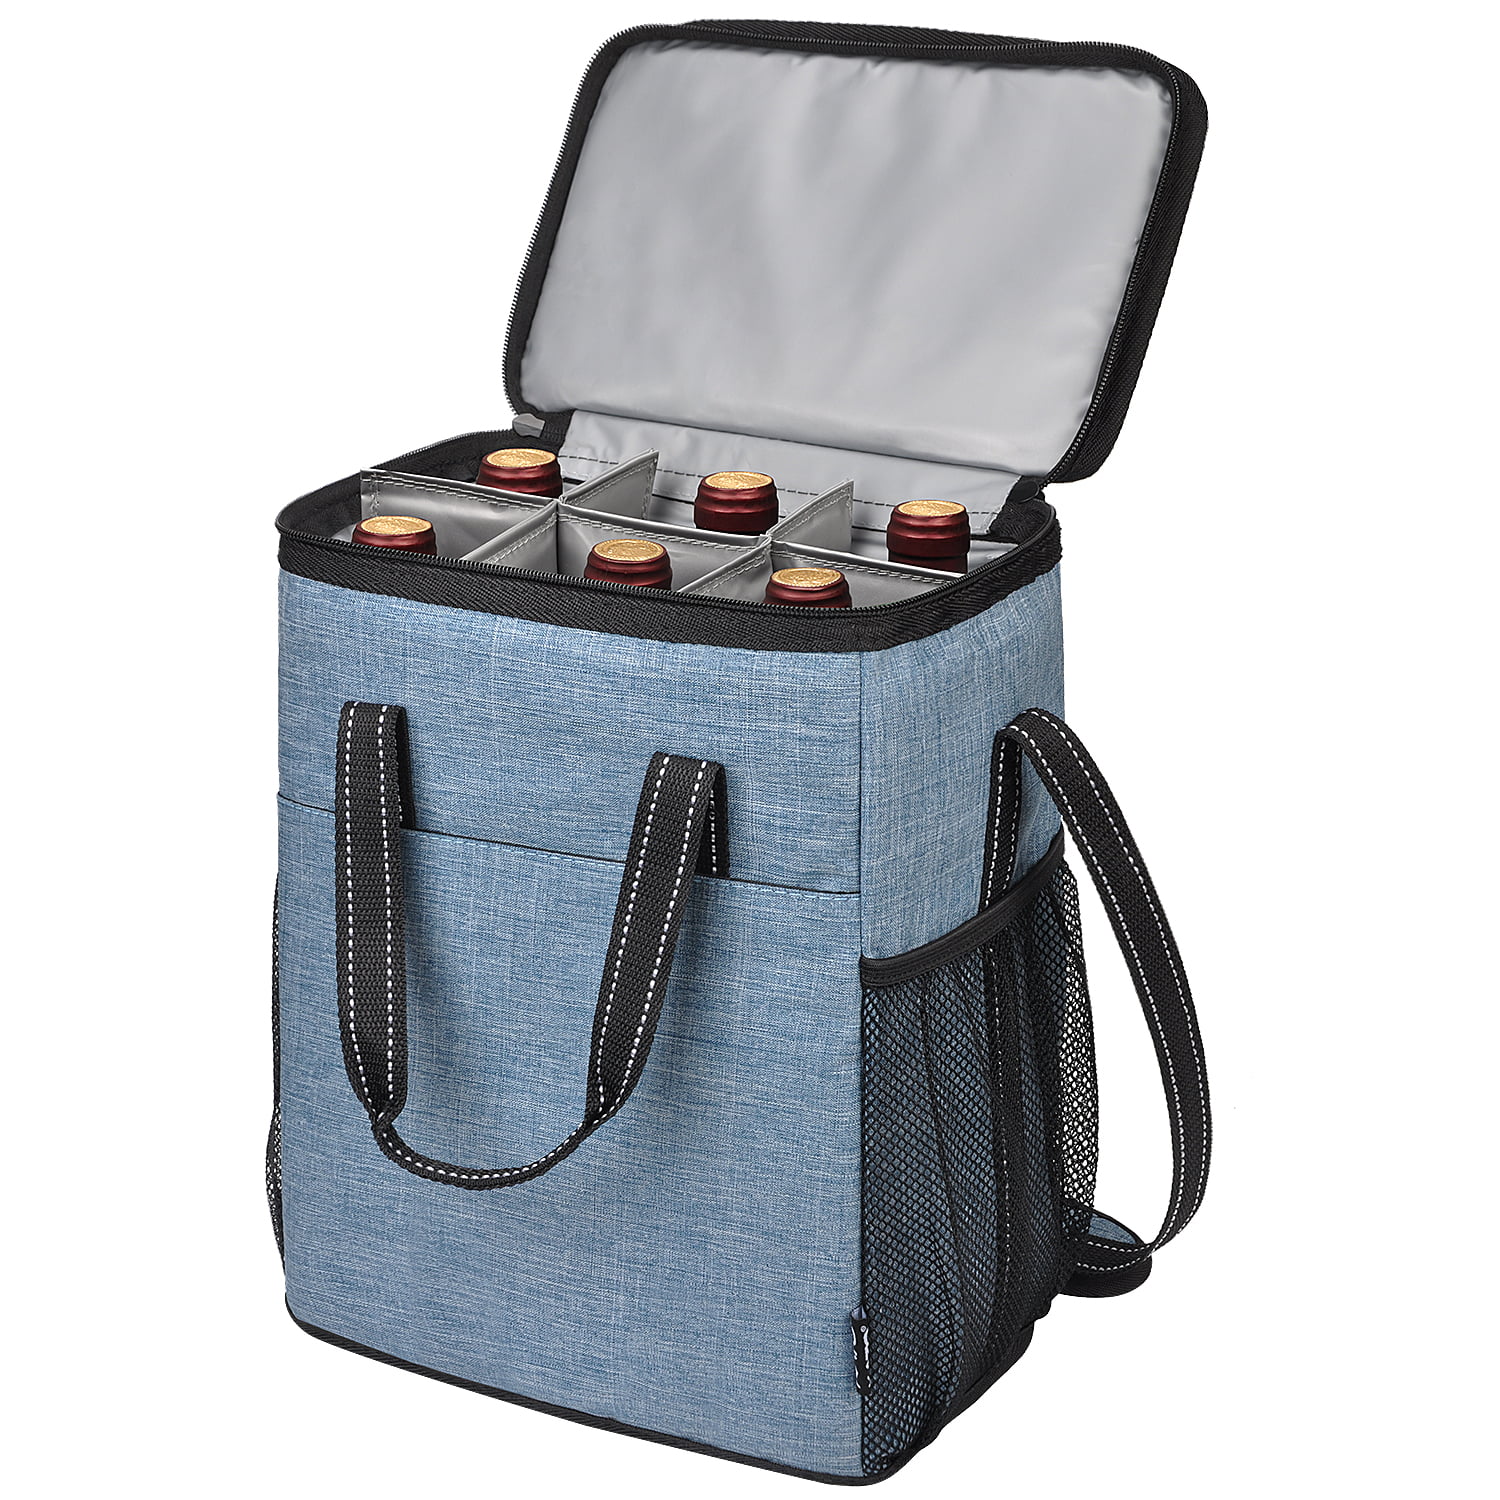 Insulated Wine Carrying Case Cooler Tote Bag Travel or Picnic Black Kato 6 Bottle Wine Carrier Perfect Wine Lover Gift